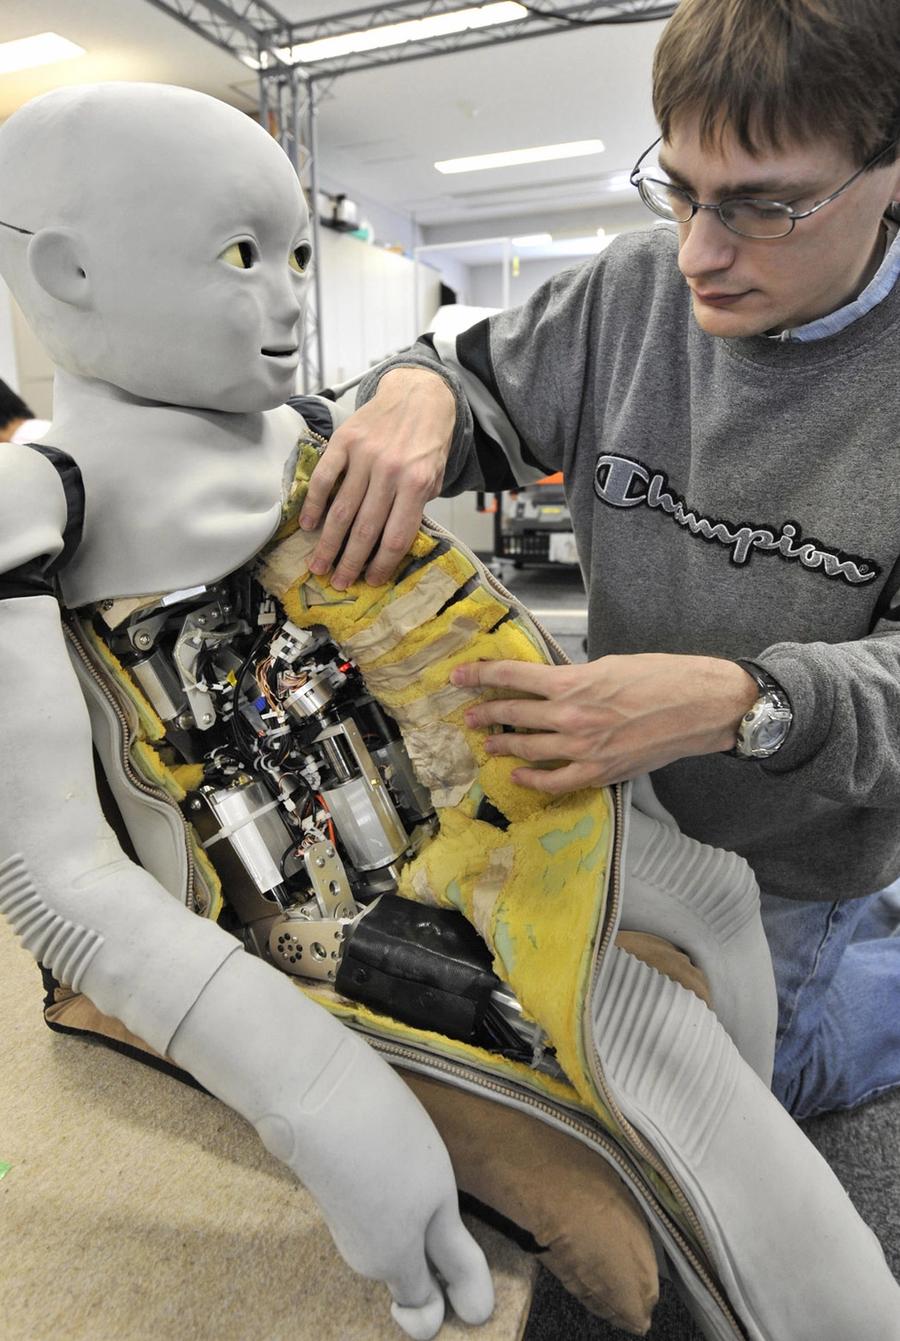 A man in glasses holds open the side of the robots "skin" to show the electronics within.